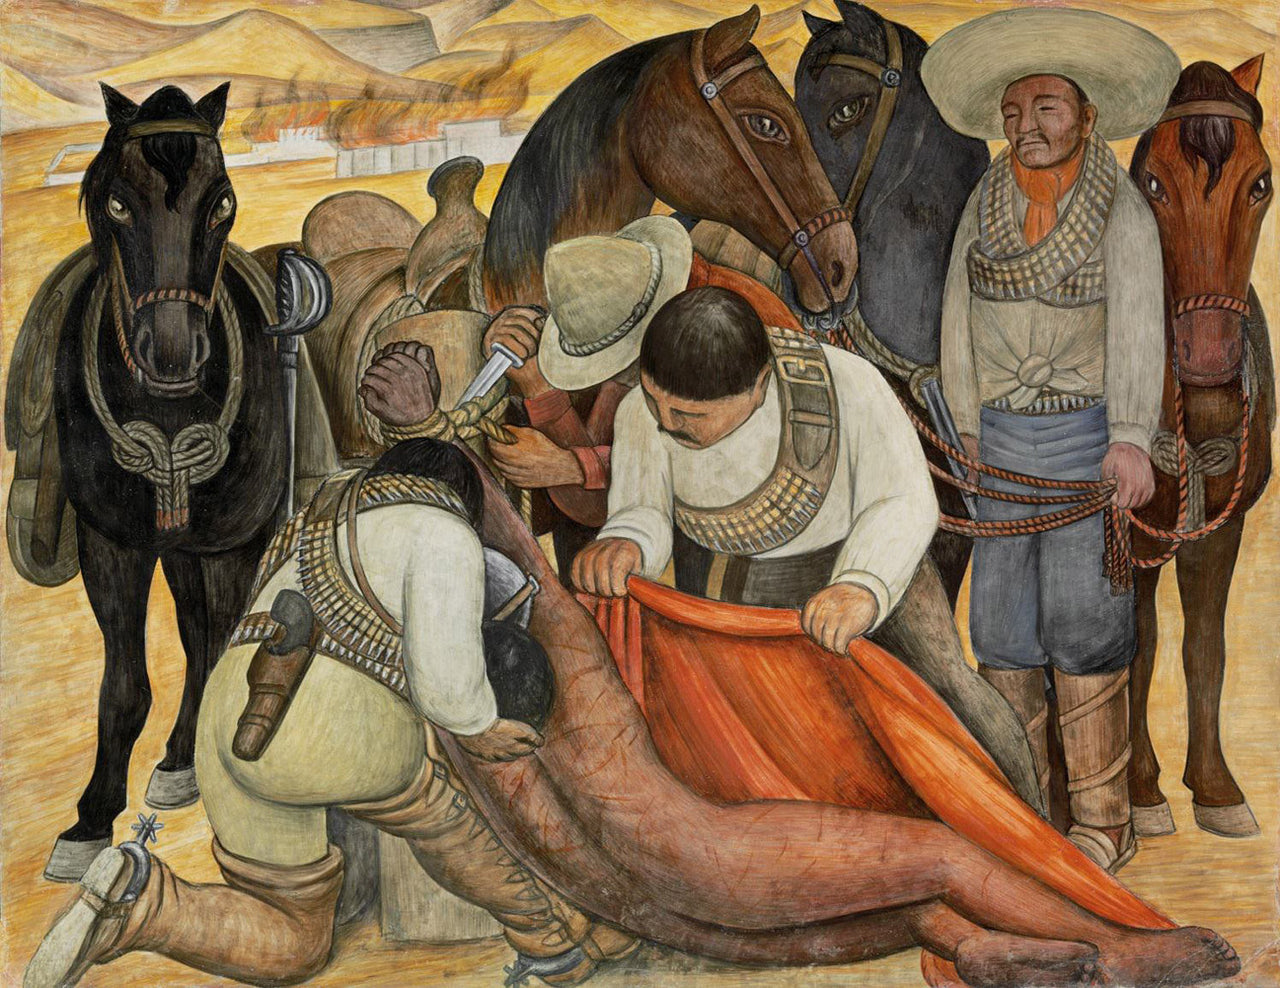 Diego Rivera - Liberation of the Peon